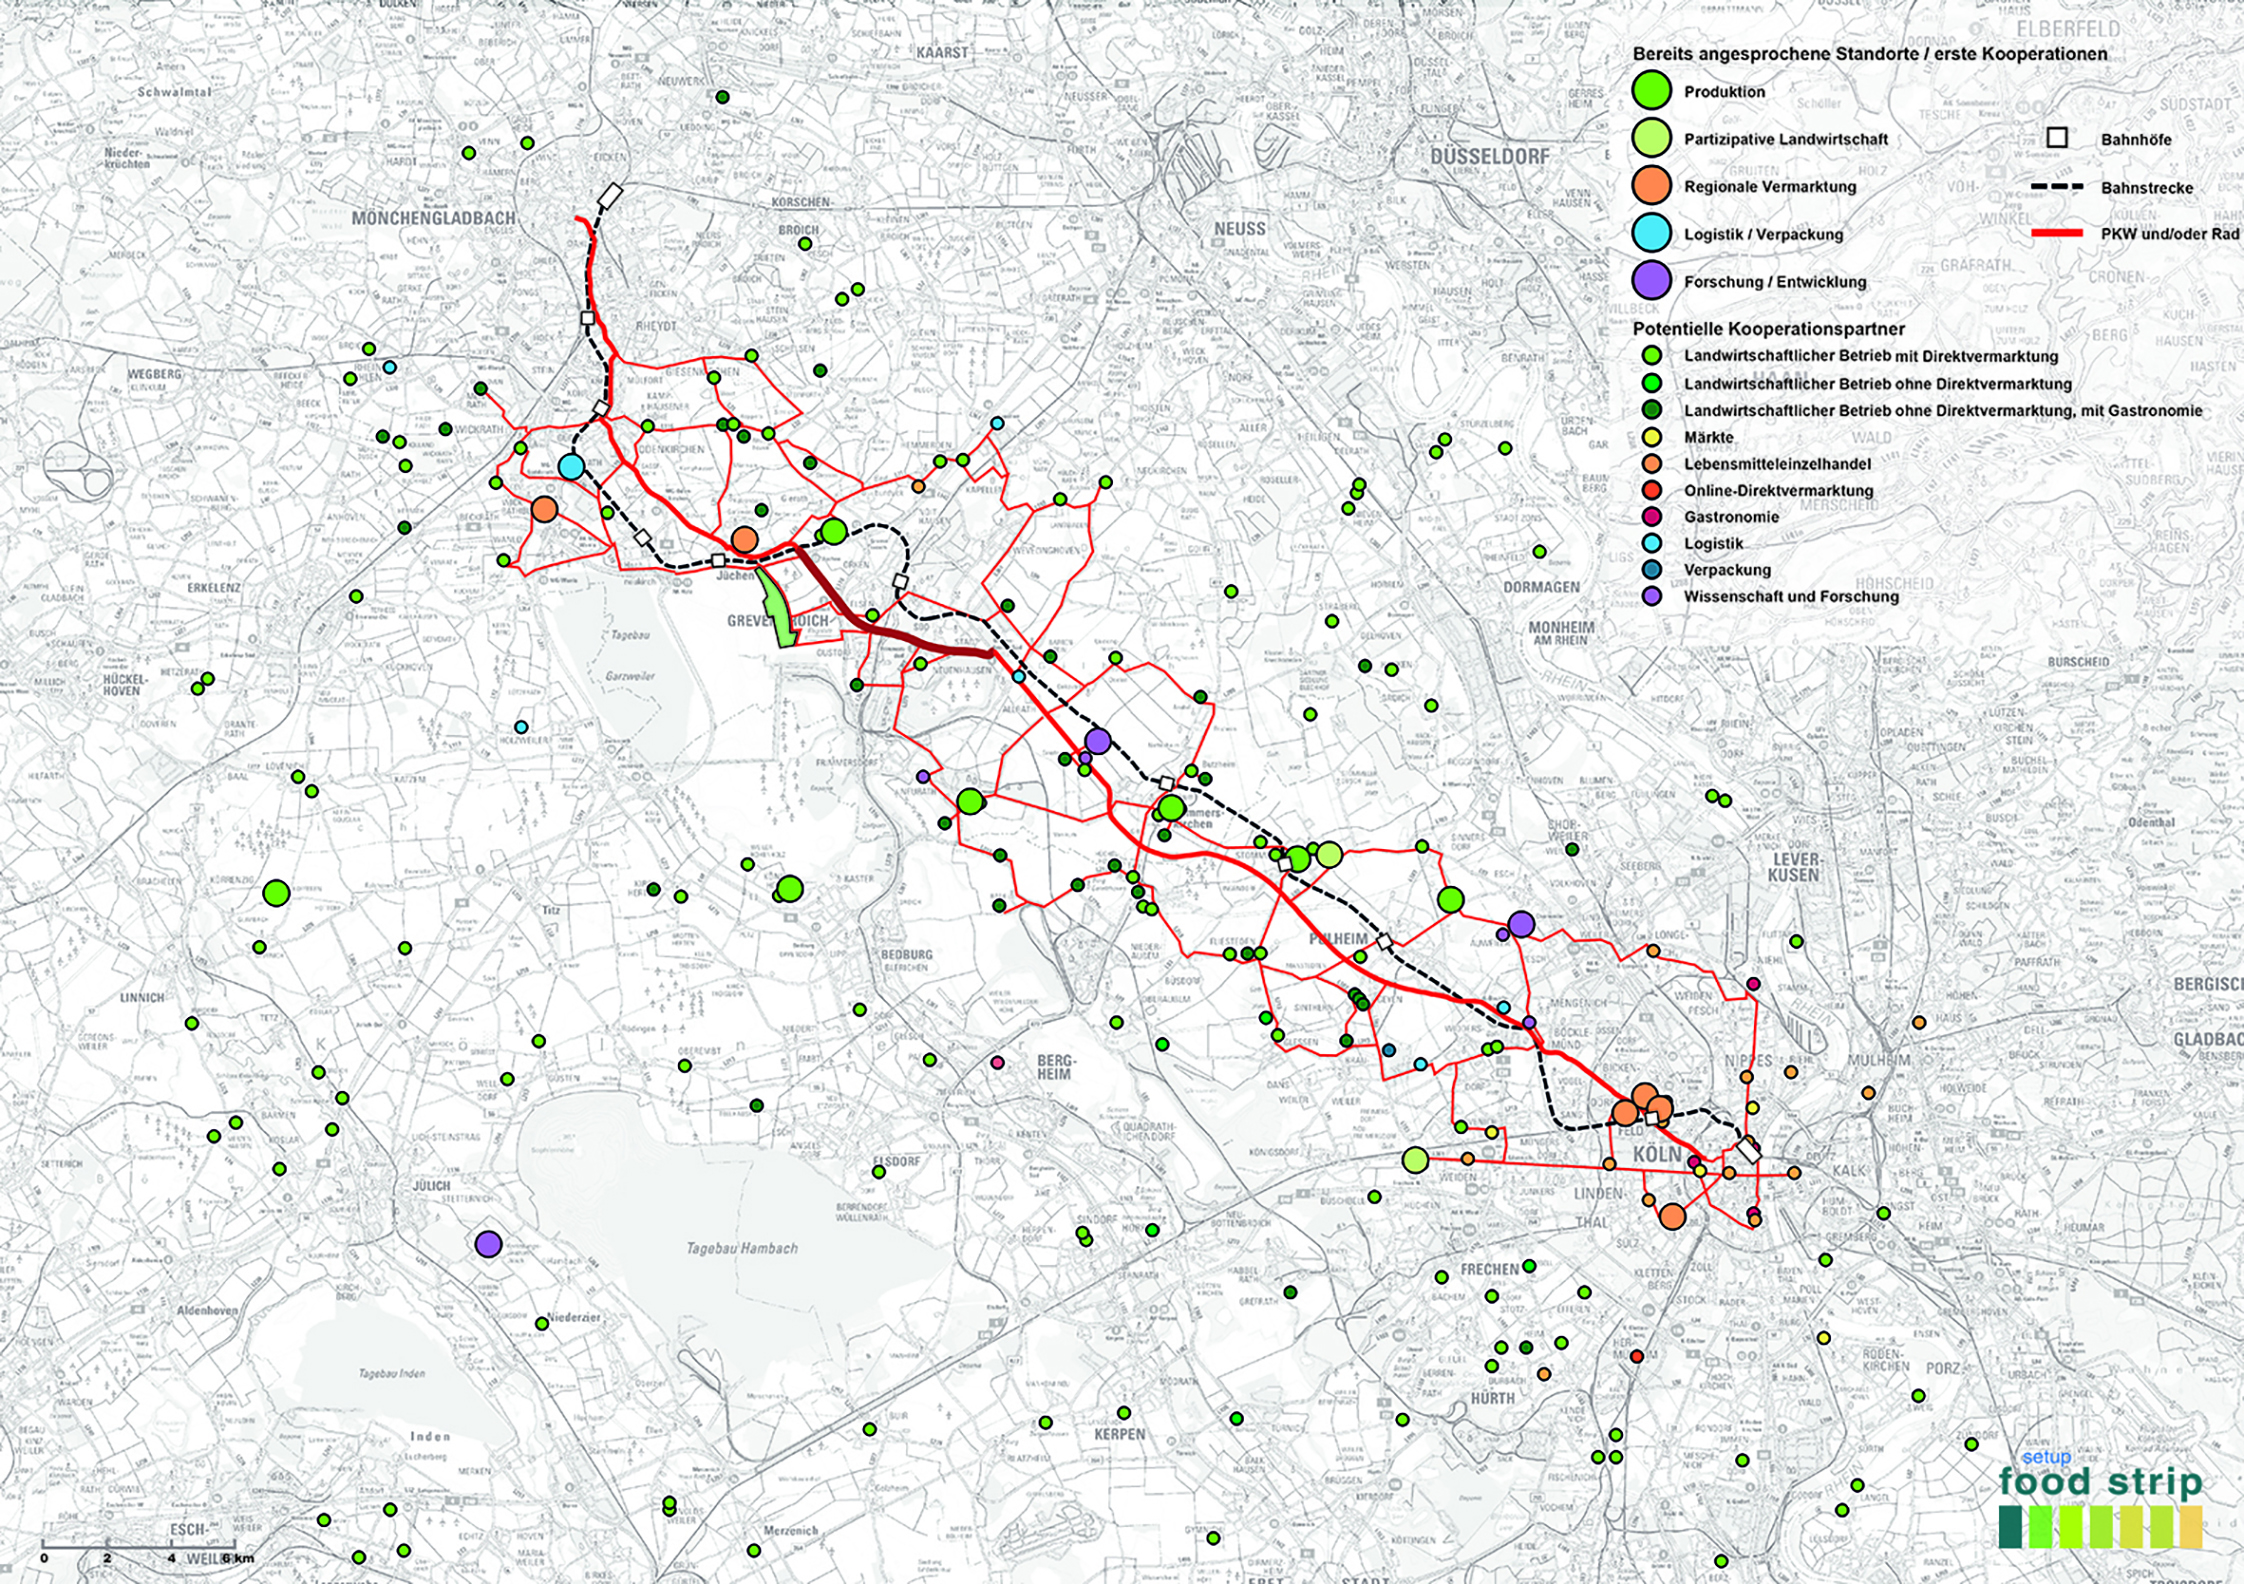 Image showing a complex map, highlighting various locations of value-chain participants and potential recreational routes between the cities Mönchengladbach and Cologne.